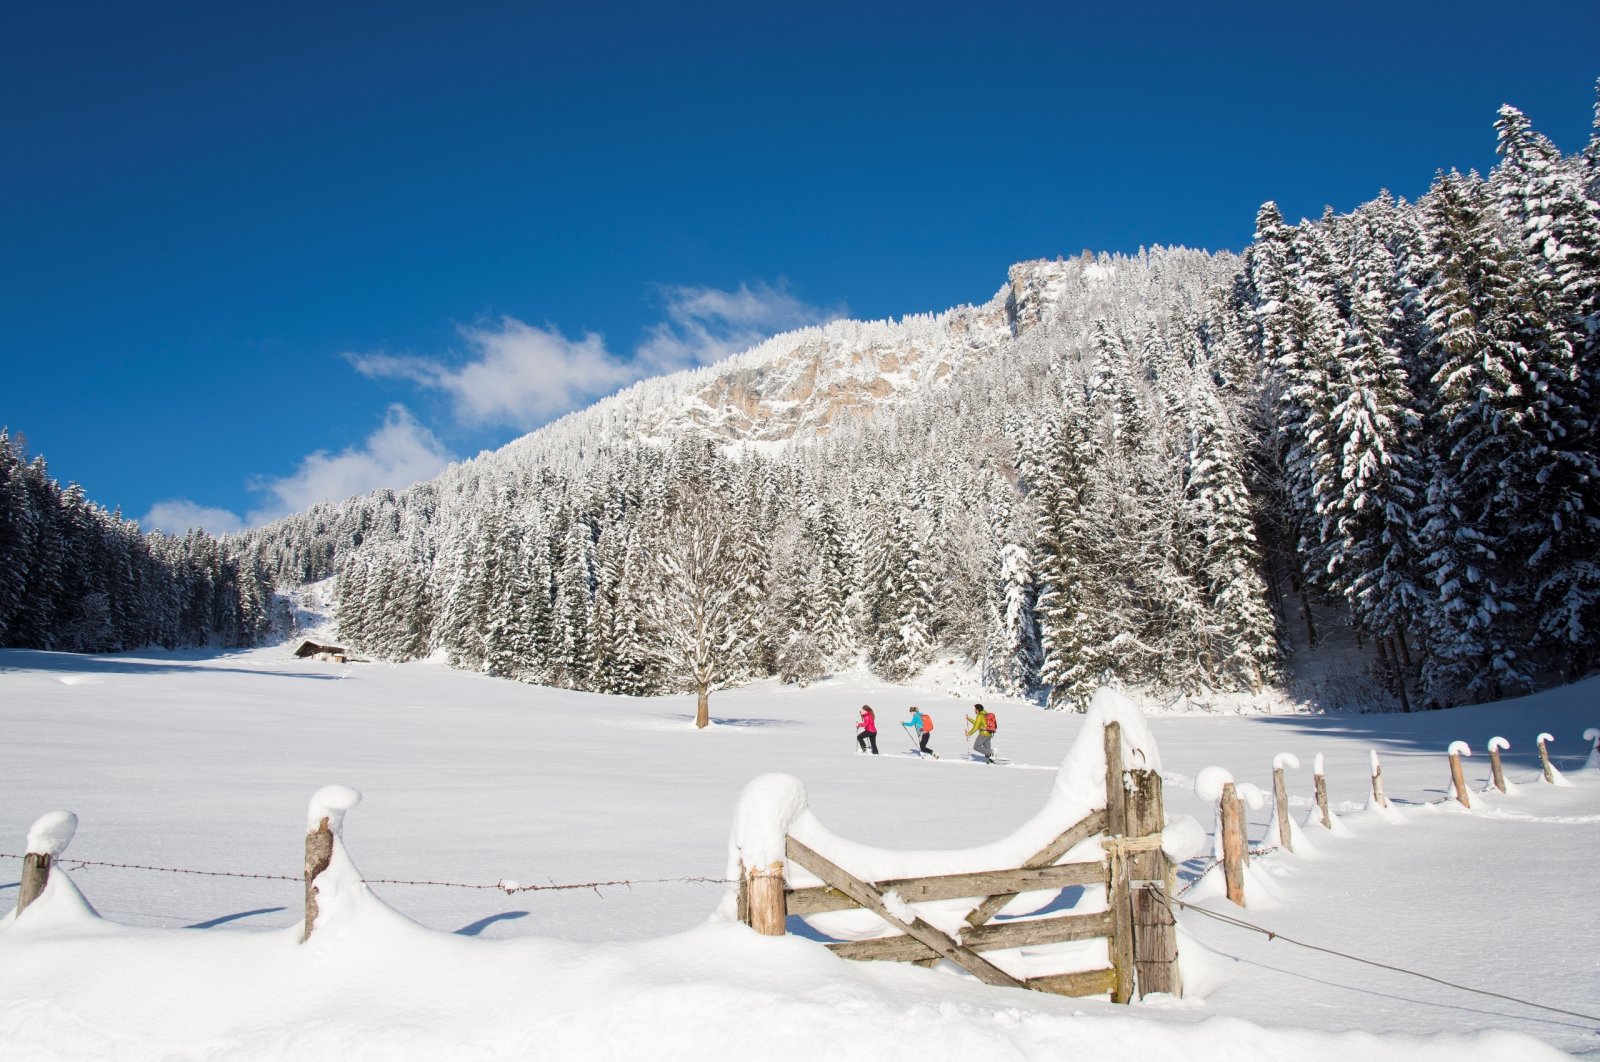 A bit of inner peace and calm in the midst of breathtaking nature? A new series of snowshoe hikes in Austria are designed to achieve just that. (Franz Gerdl/dpa Photo)